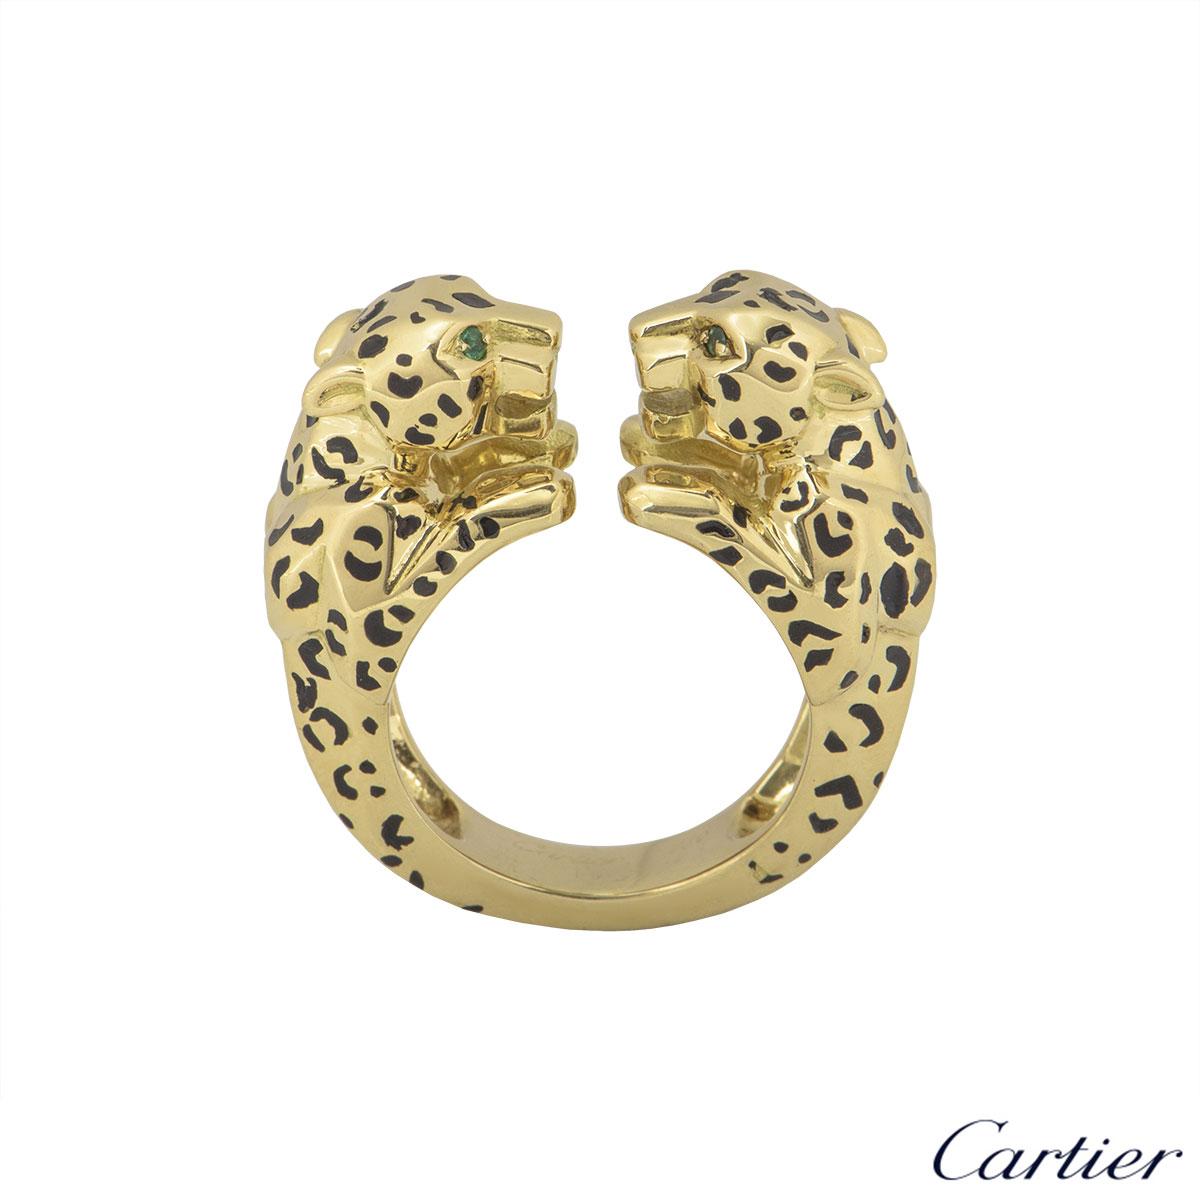 A beautiful 18k yellow gold and enamel ring by Cartier from the Panthere De Cartier collection. The ring is composed of two panthere head motifs beside each other set with bold enamel spots and are complemented with two round emeralds set as the